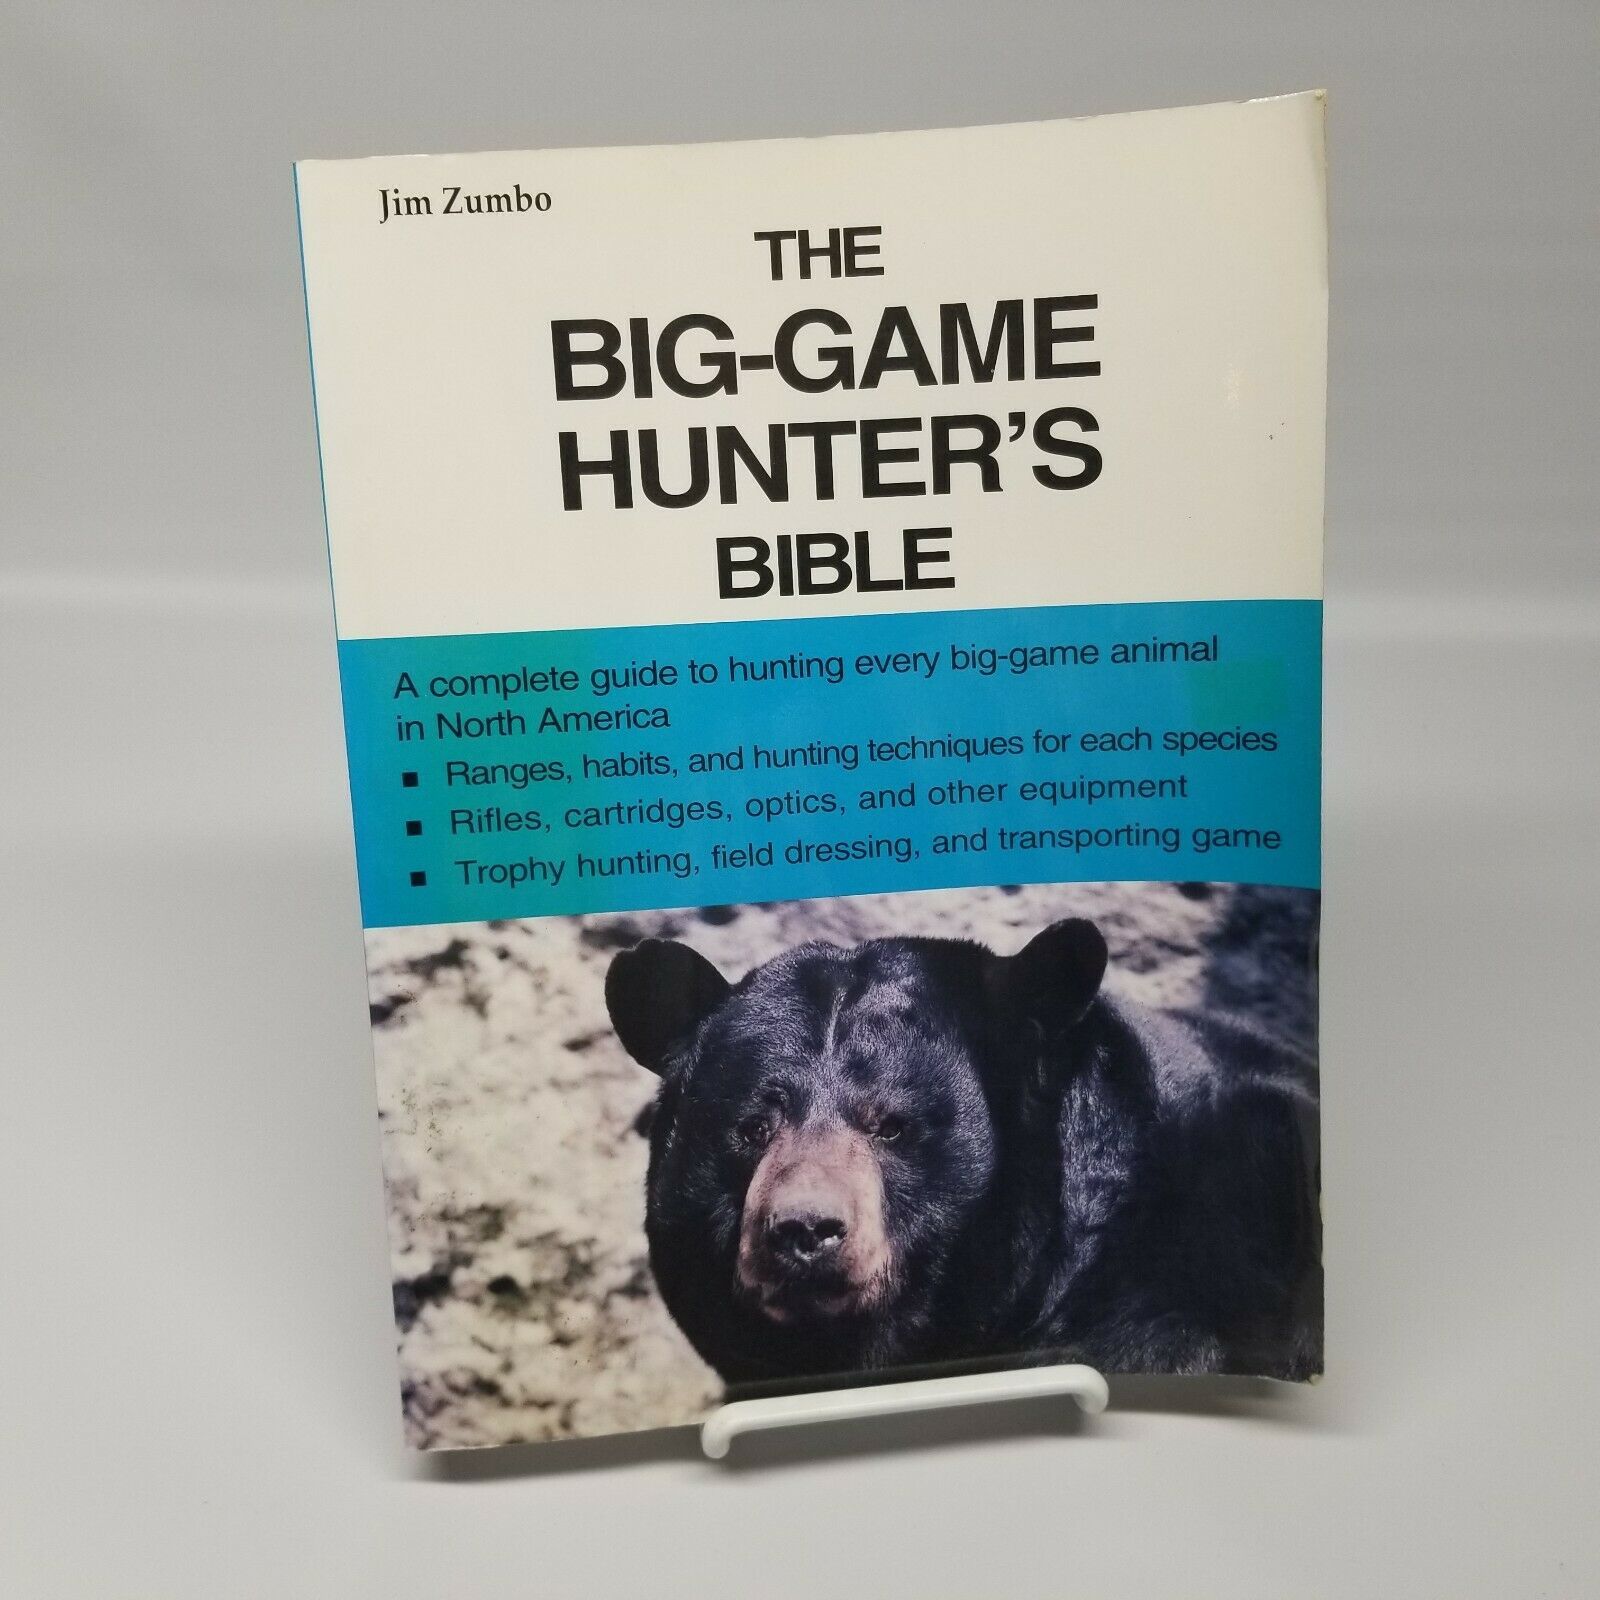 Vintage The Big Game Hunter's Bible by Jim Zumbo (1994, Trade Paperback) - $9.78